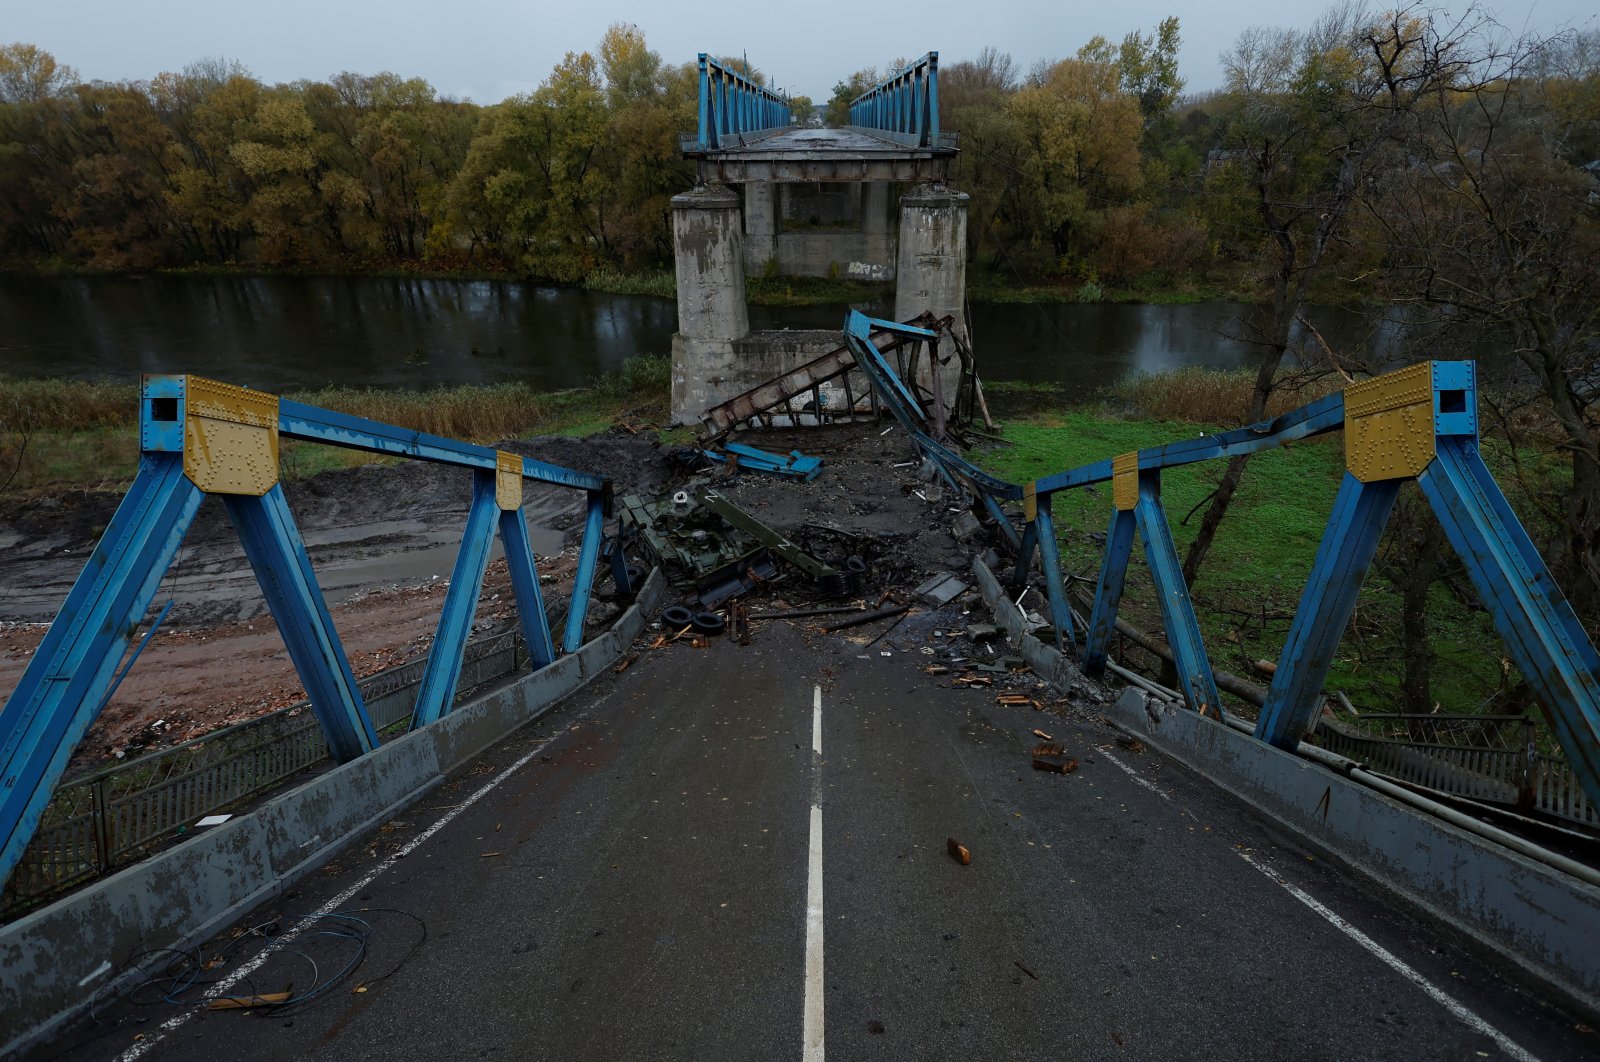 A tank painted with the letter "Z" lies at the bottom of a section of a destroyed bridge in Izium, Kharkiv region, Ukraine, Oct. 20, 2022. (Reuters Photo)